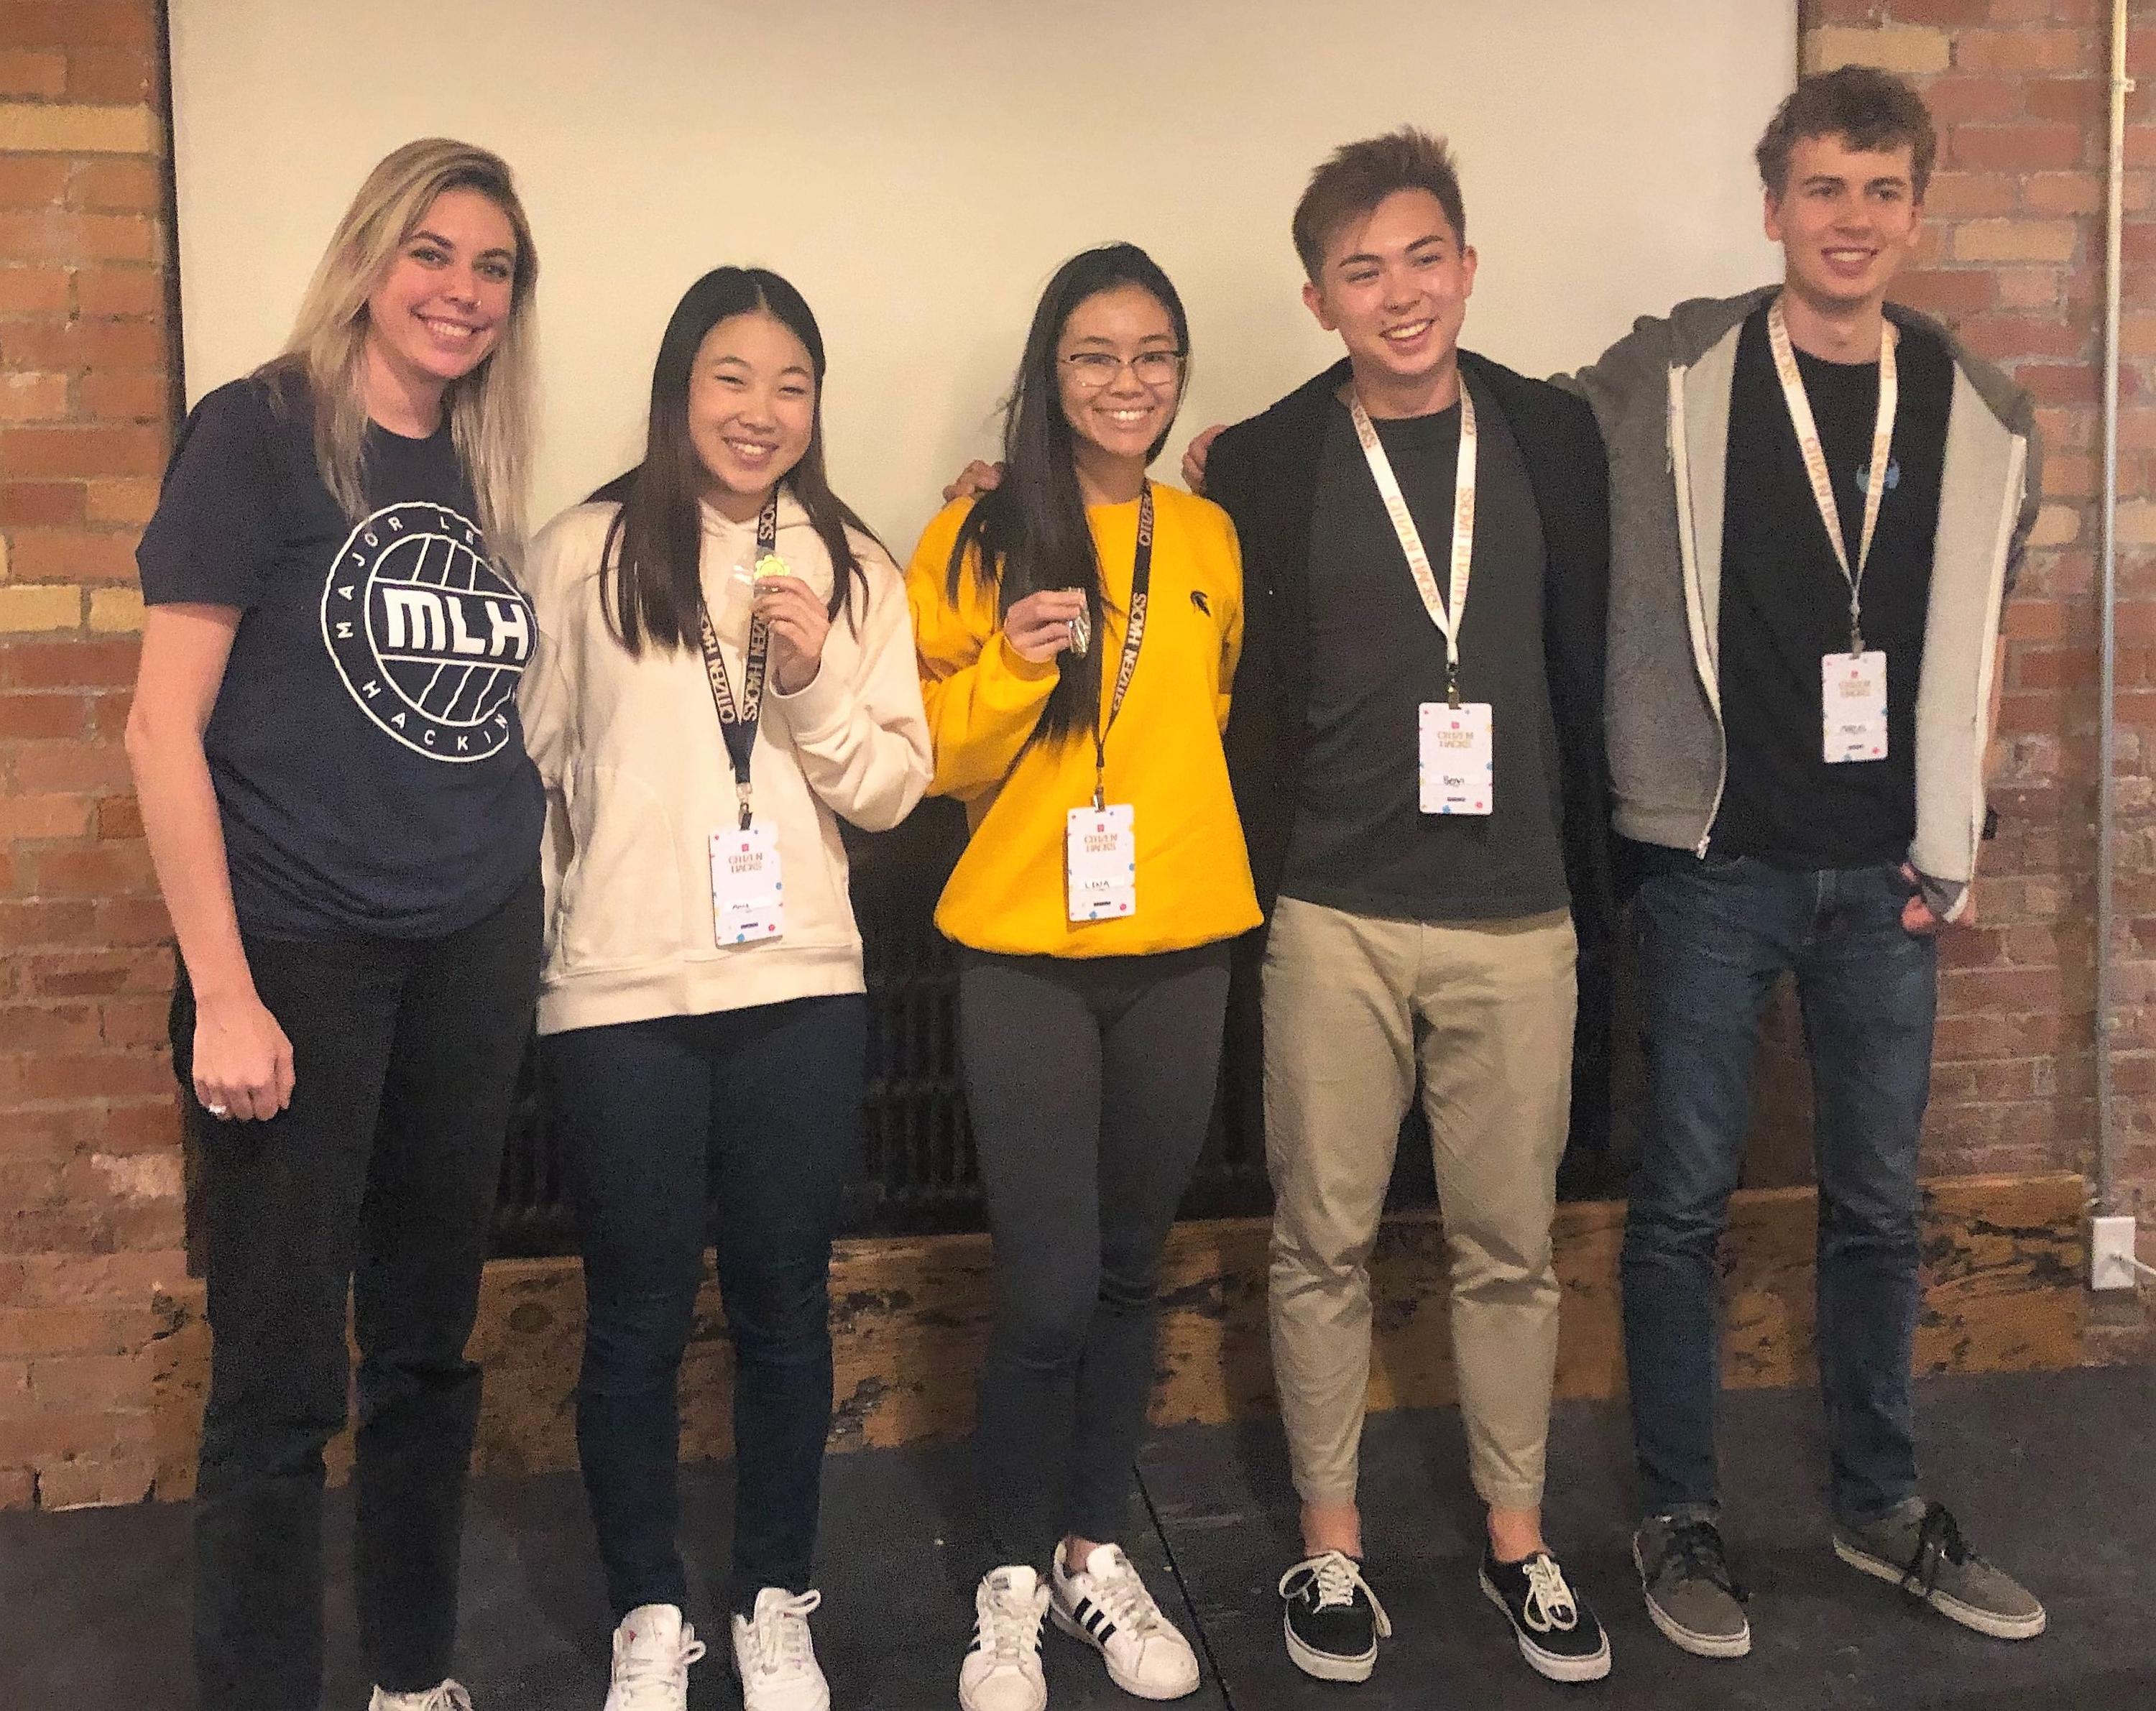 Anne Chung (secdond from left) and Lena Nguyen (third from left) pose with organizers after taking top place at the inaugural Citizen Hacks.